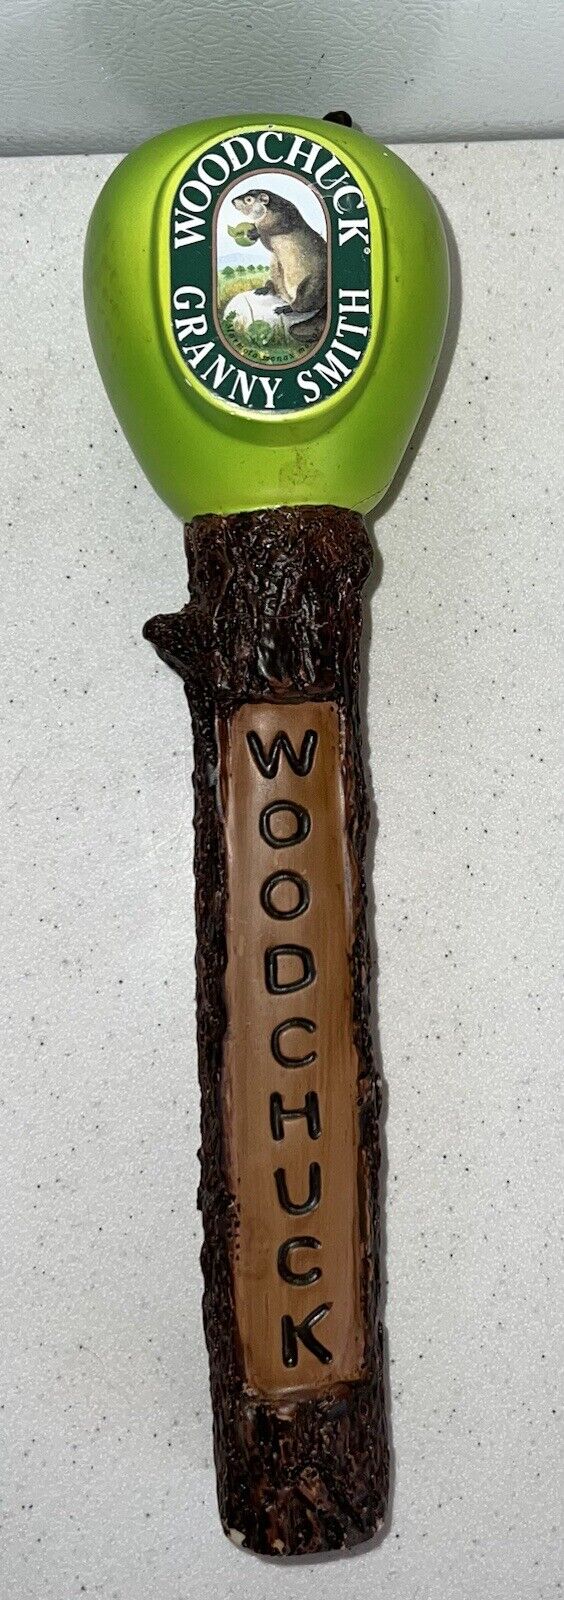 WOODCHUCK GRANNY SMITH HARD CIDER draft Beer tap handle SW44